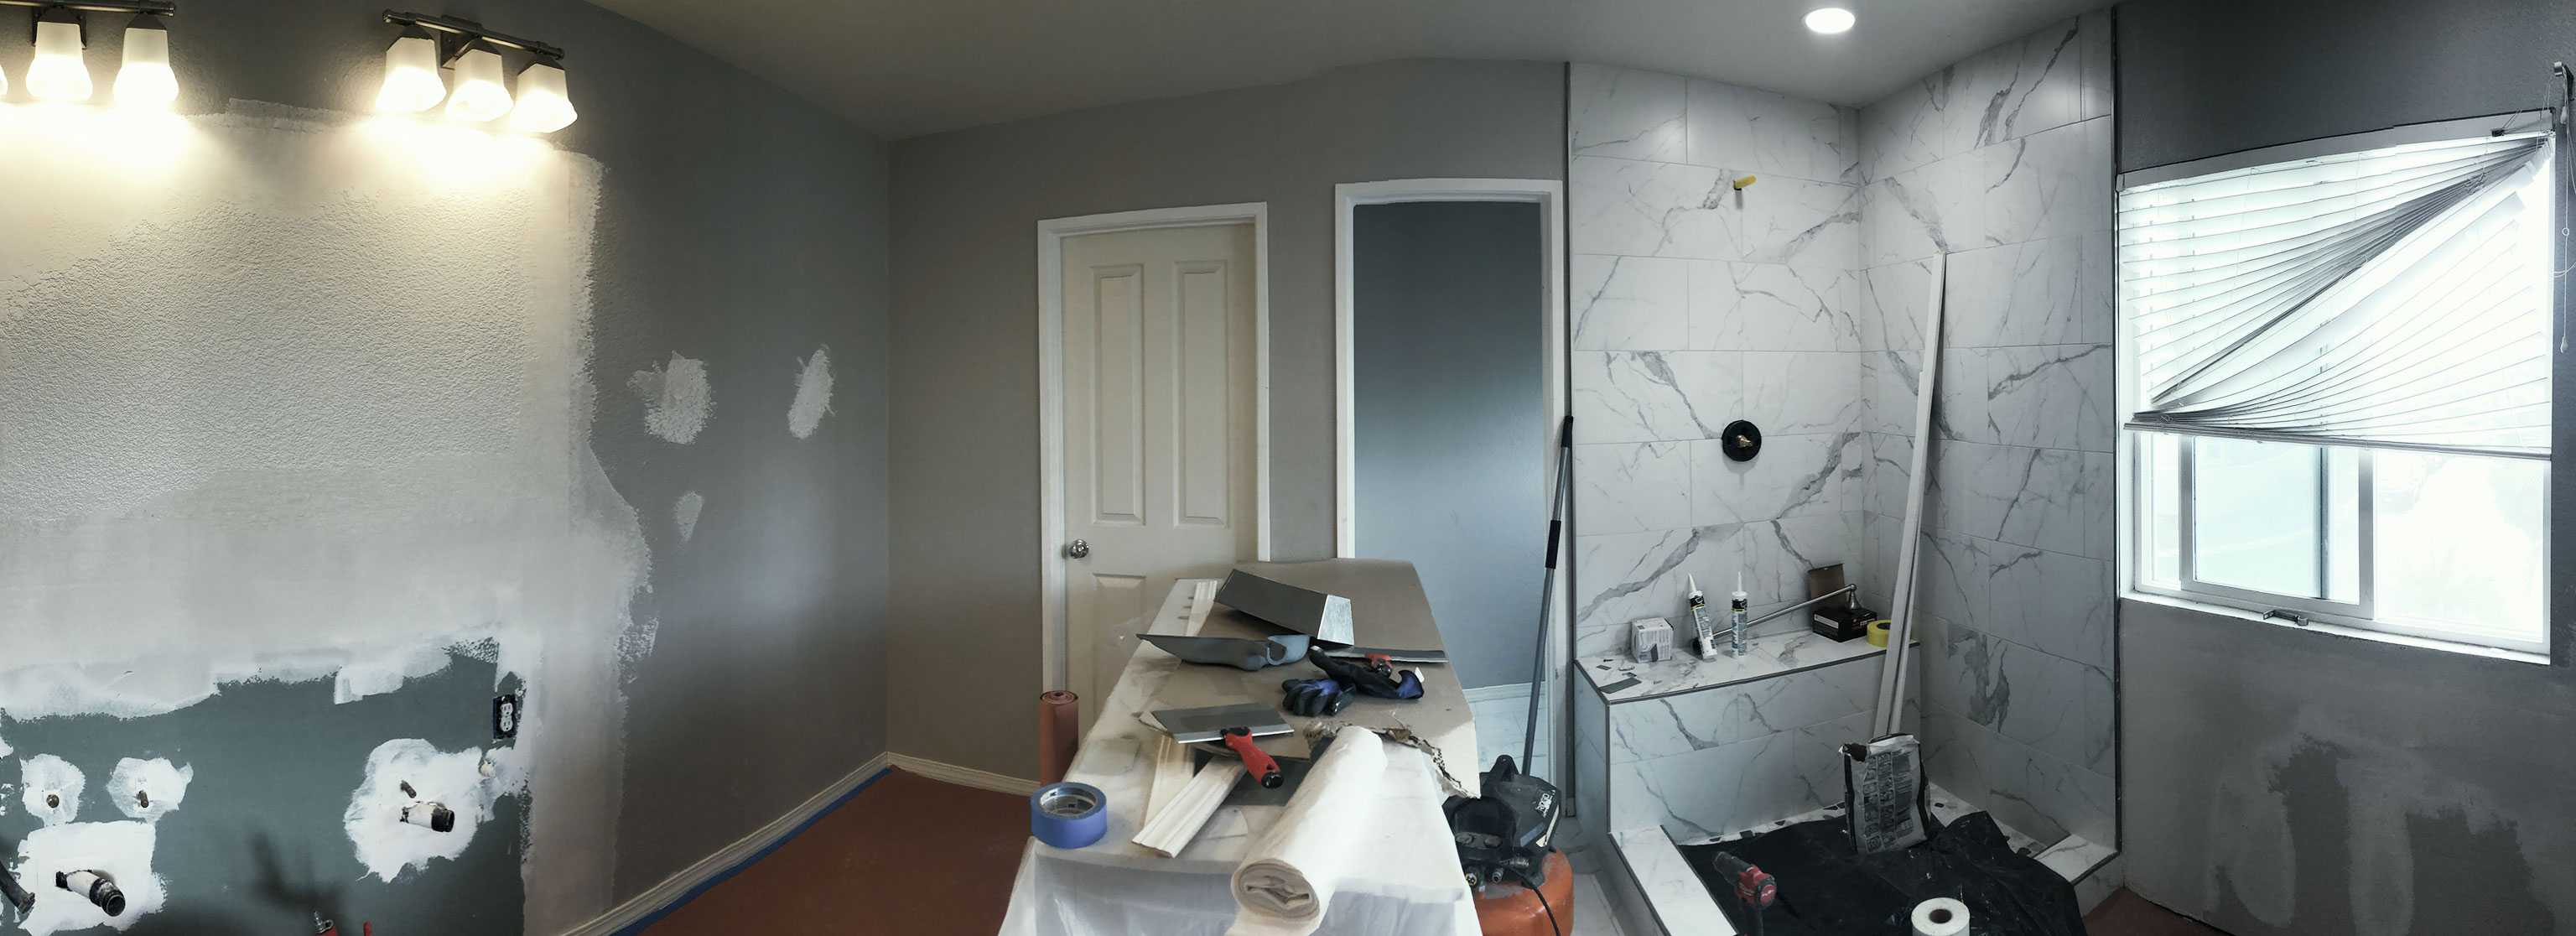 bathroom-remodel-A2M-Contractors-getting-ready-to-texture-and-paint